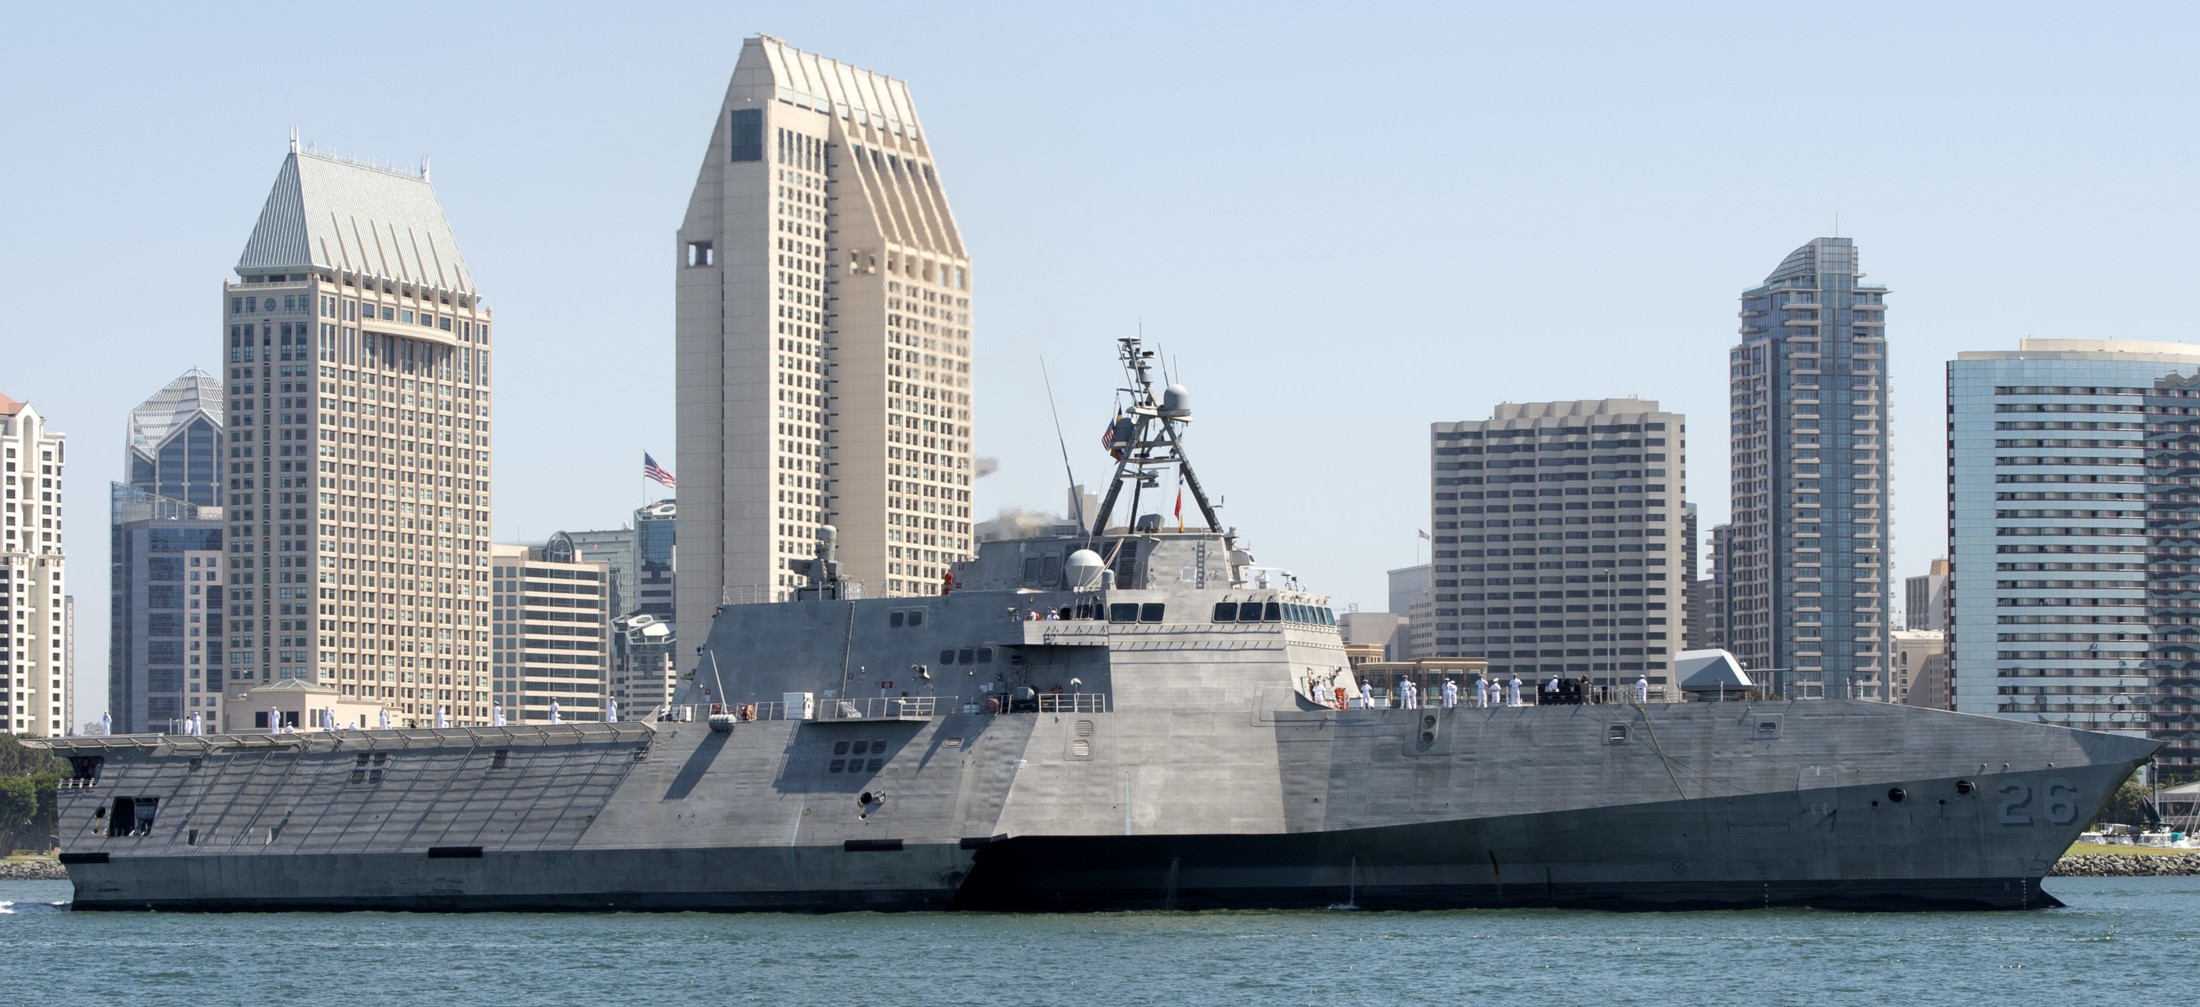 lcs-26 uss mobile independence class littoral combat ship us navy san diego california 12